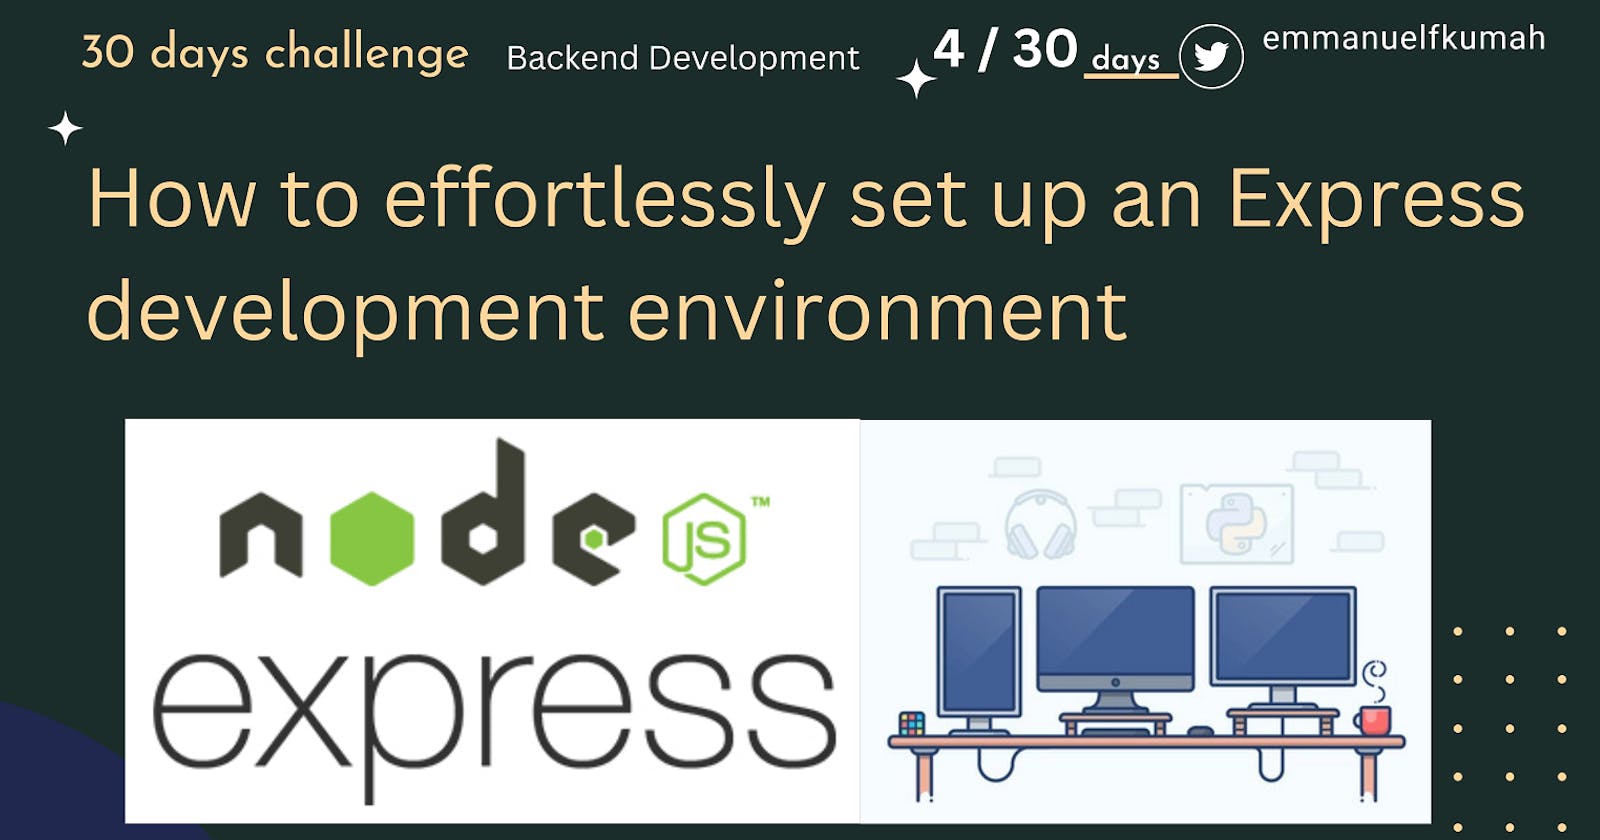 How to effortlessly set up an Express development environment